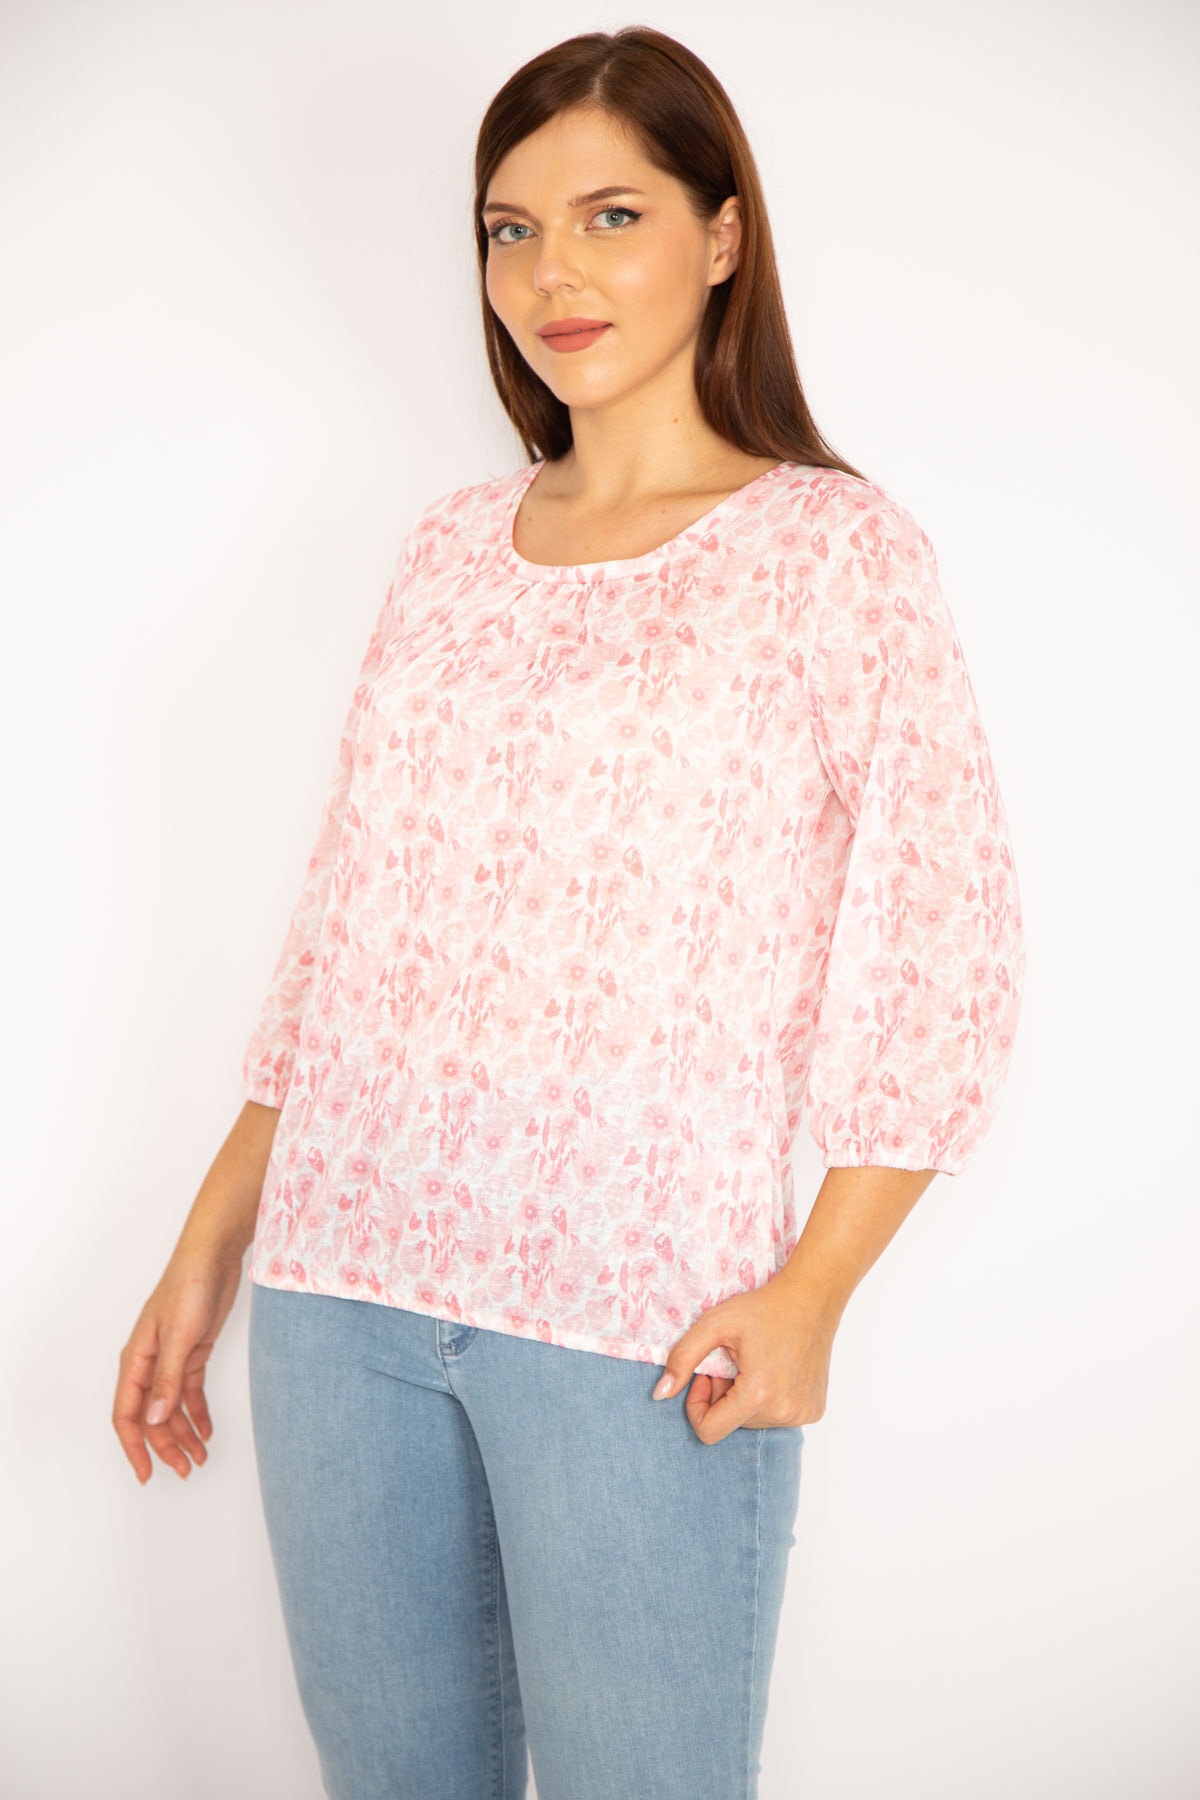 Şans Women's Plus Size Pink Patterned Blouse with Elastic Hem and Sleeves